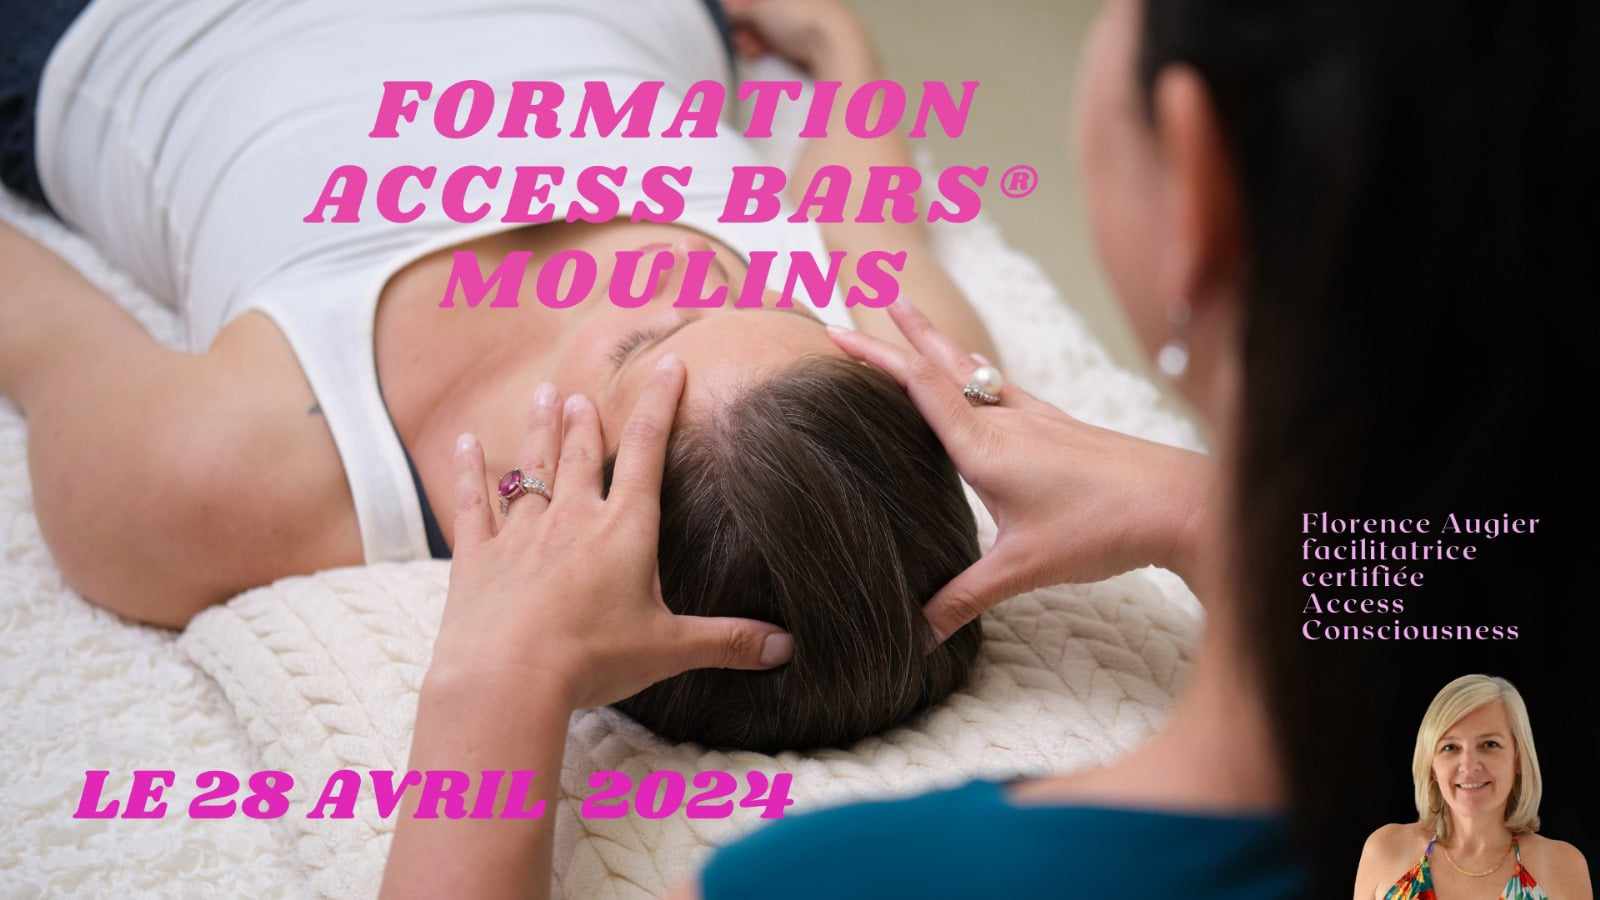 FORMATION ACCESS BARS